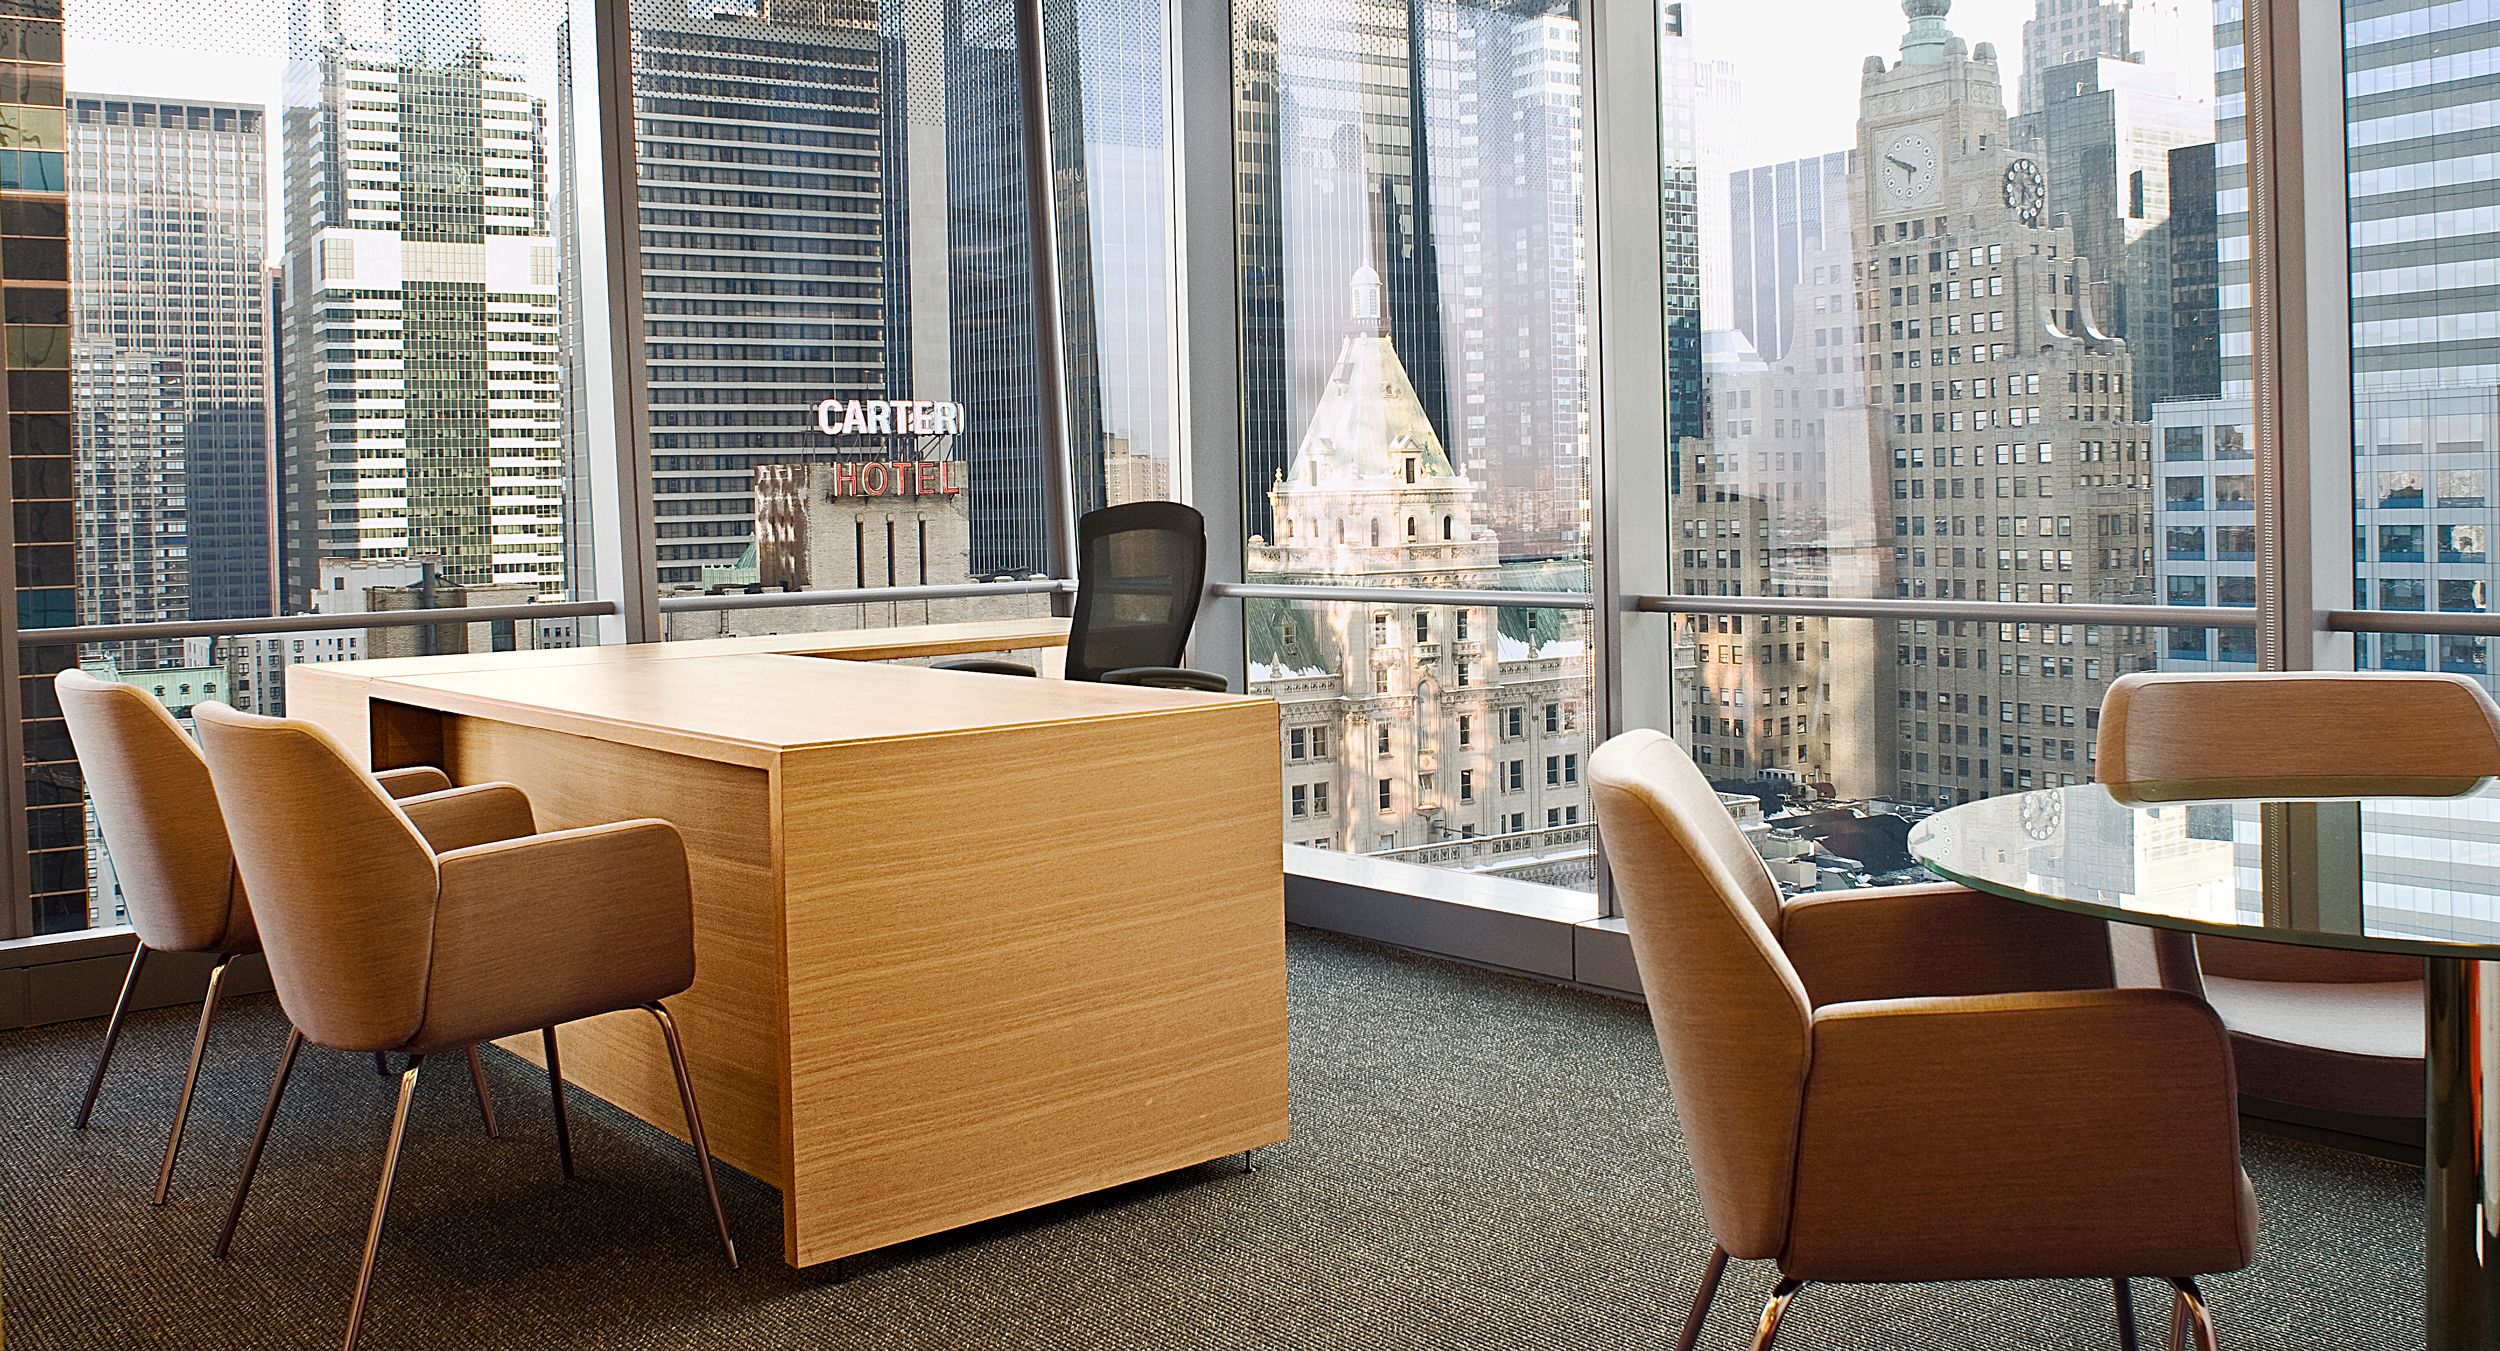 HALCON provided nearly 200 unique partner office configurations and also provided ancillary pieces including round glass tables.